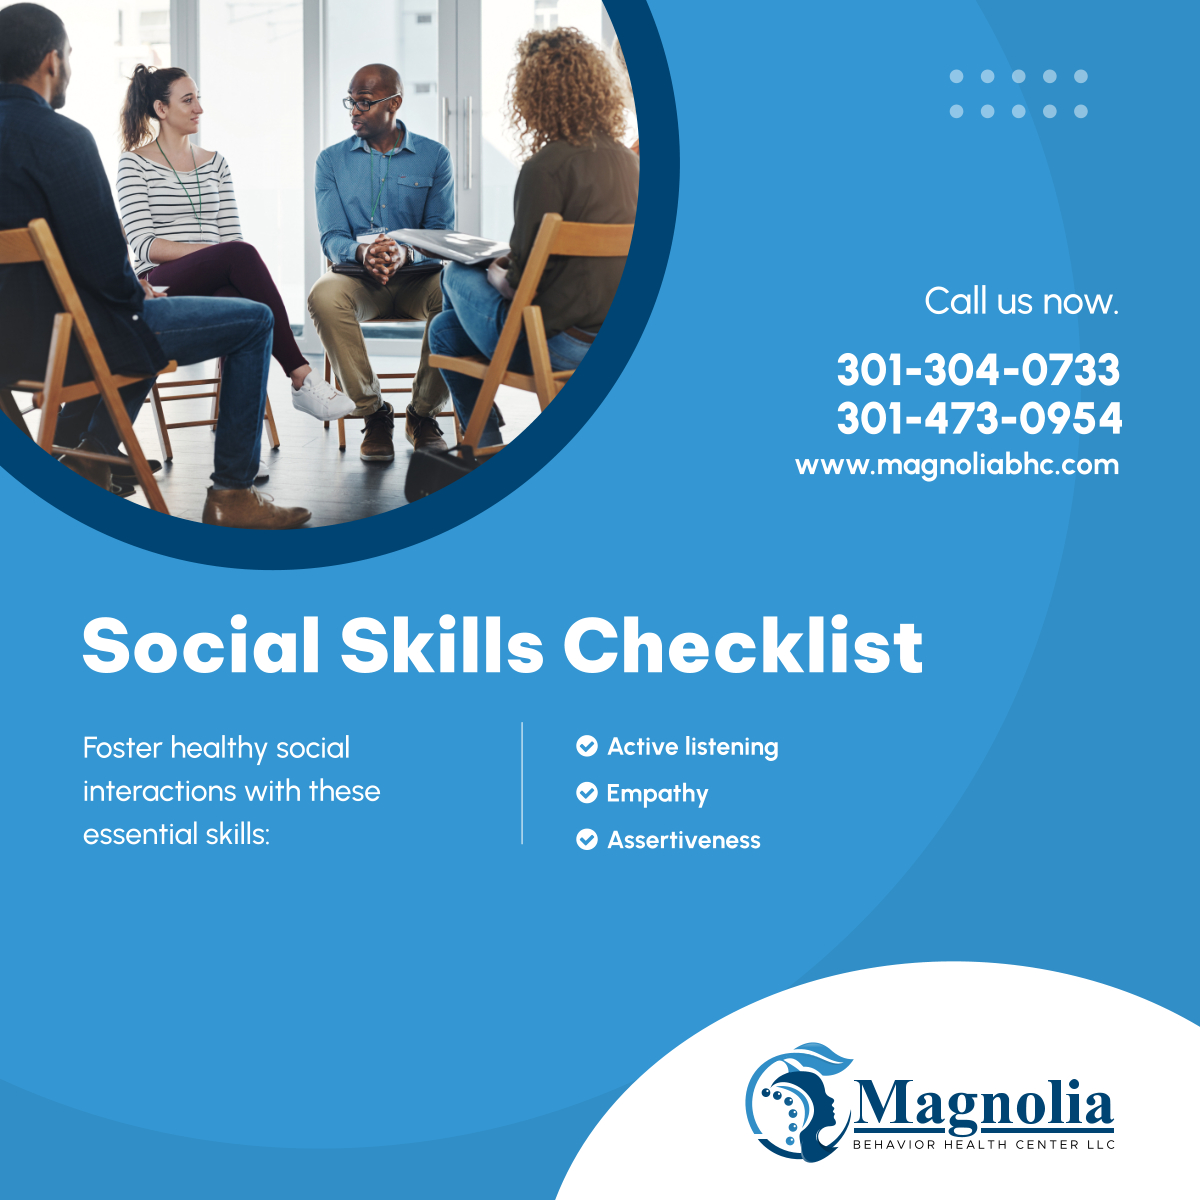 Cultivate strong social skills for better relationships and mental well-being. Start practicing today.

#FrederickMD #BehavioralHealthCare #SocialSkills